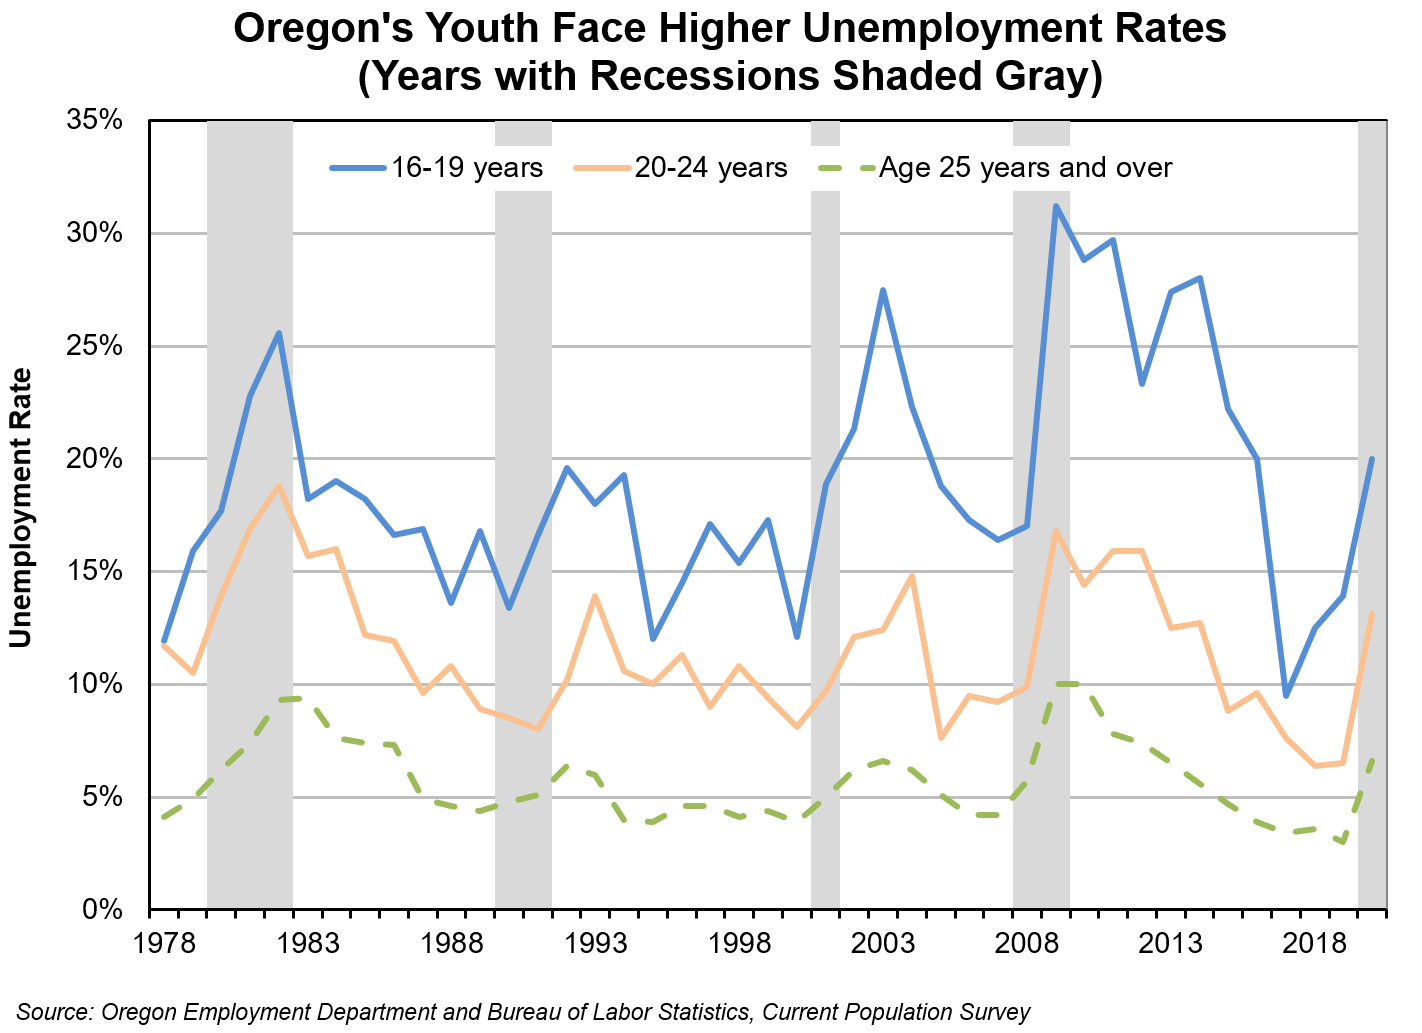 Graph showing Oregon's youth face higher unemployment rates (years with recessions shaded gray)